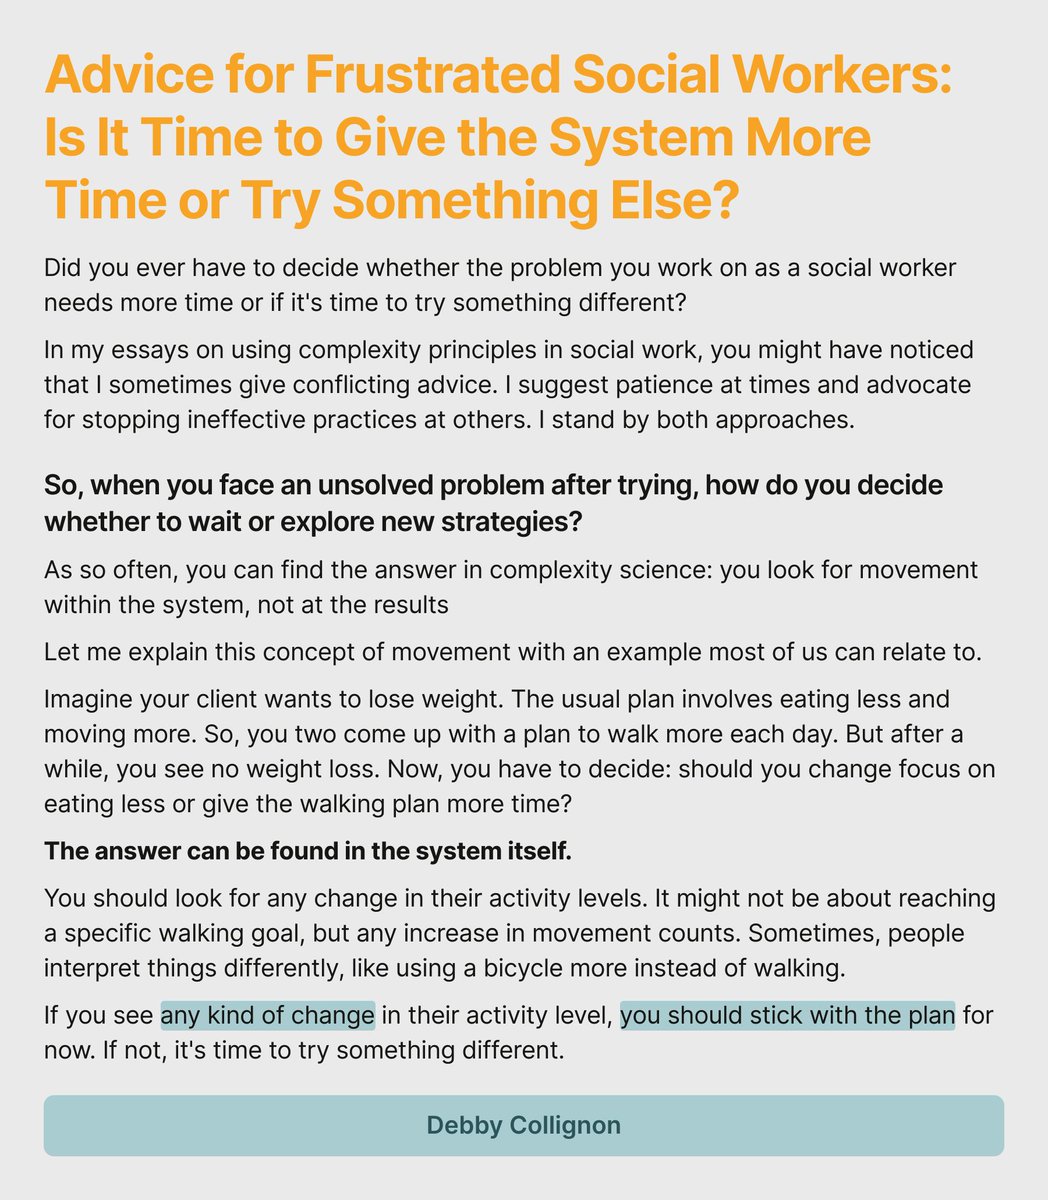 Advice for Frustrated Social Workers: Is It Time to Give the System More Time or Try Something Else?

#SocialWork #ComplexityScience #ProblemSolving #ComplexSystems #Adaptability #SocialWorkPractice #SystemDynamics #ChangeManagement #Strategy #SocialComplexity